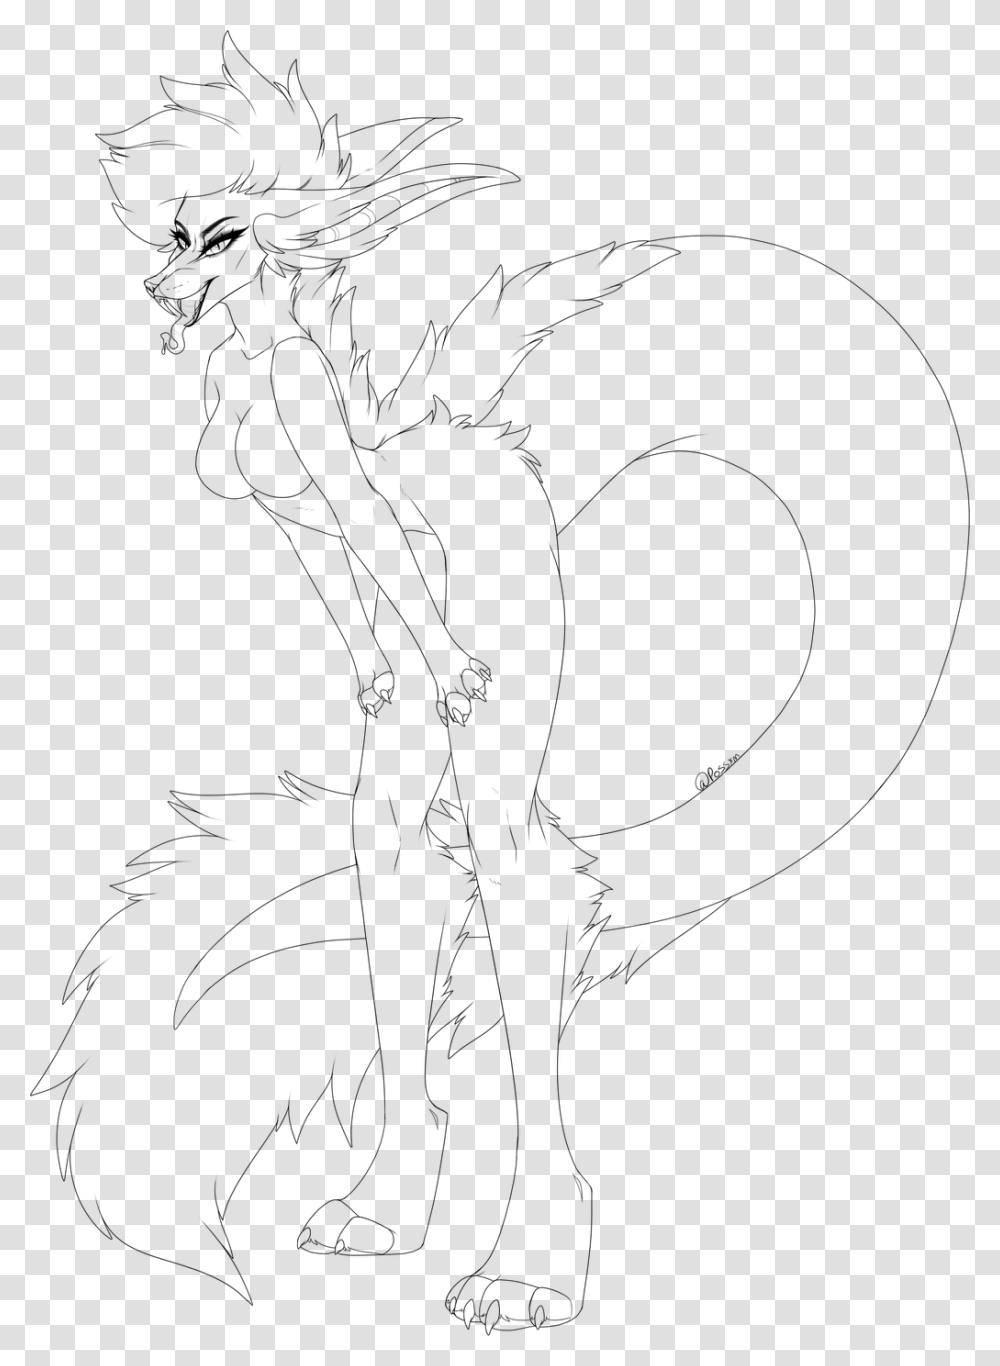 Human Top View Lineart Creature Creature Lineart, Gray, World Of Warcraft Transparent Png